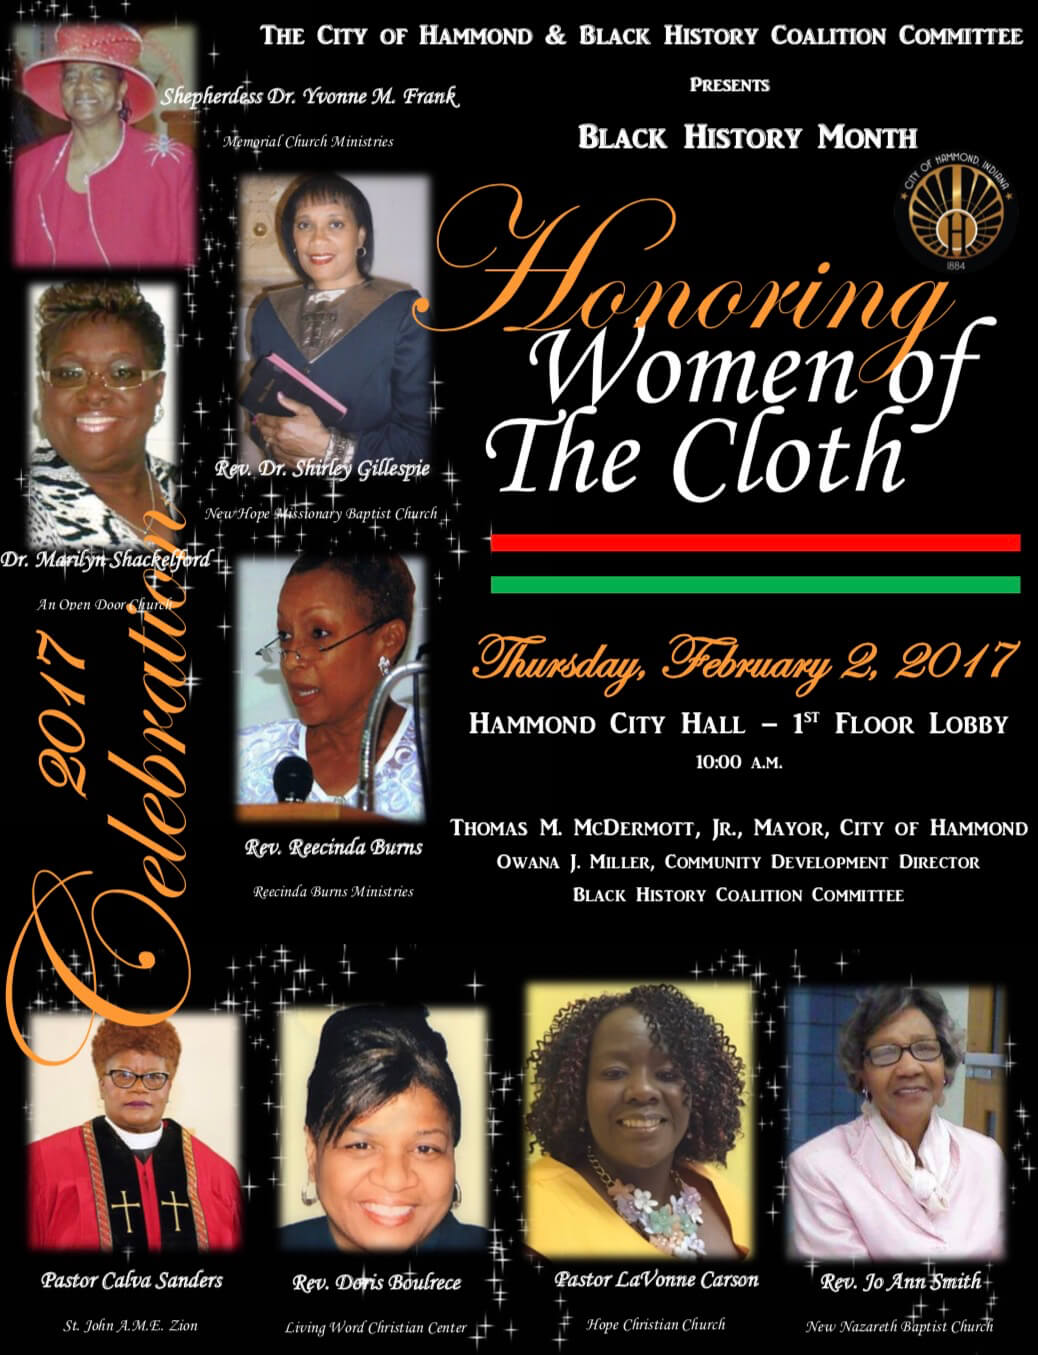 Mayor Thomas M. McDermott, Jr., the Hammond Human Relations Commission and Department of Community Development will host a Black History Month Celebration on Thursday, February 2, 2017 at Hammond City Hall, 1st floor lobby. The festivities will begin at 10:00 a.m.The theme for this year’s event is “Women of the Cloth” Mayor McDermott will present a proclamation honoring the longest married African American couples in the City of Hammond.